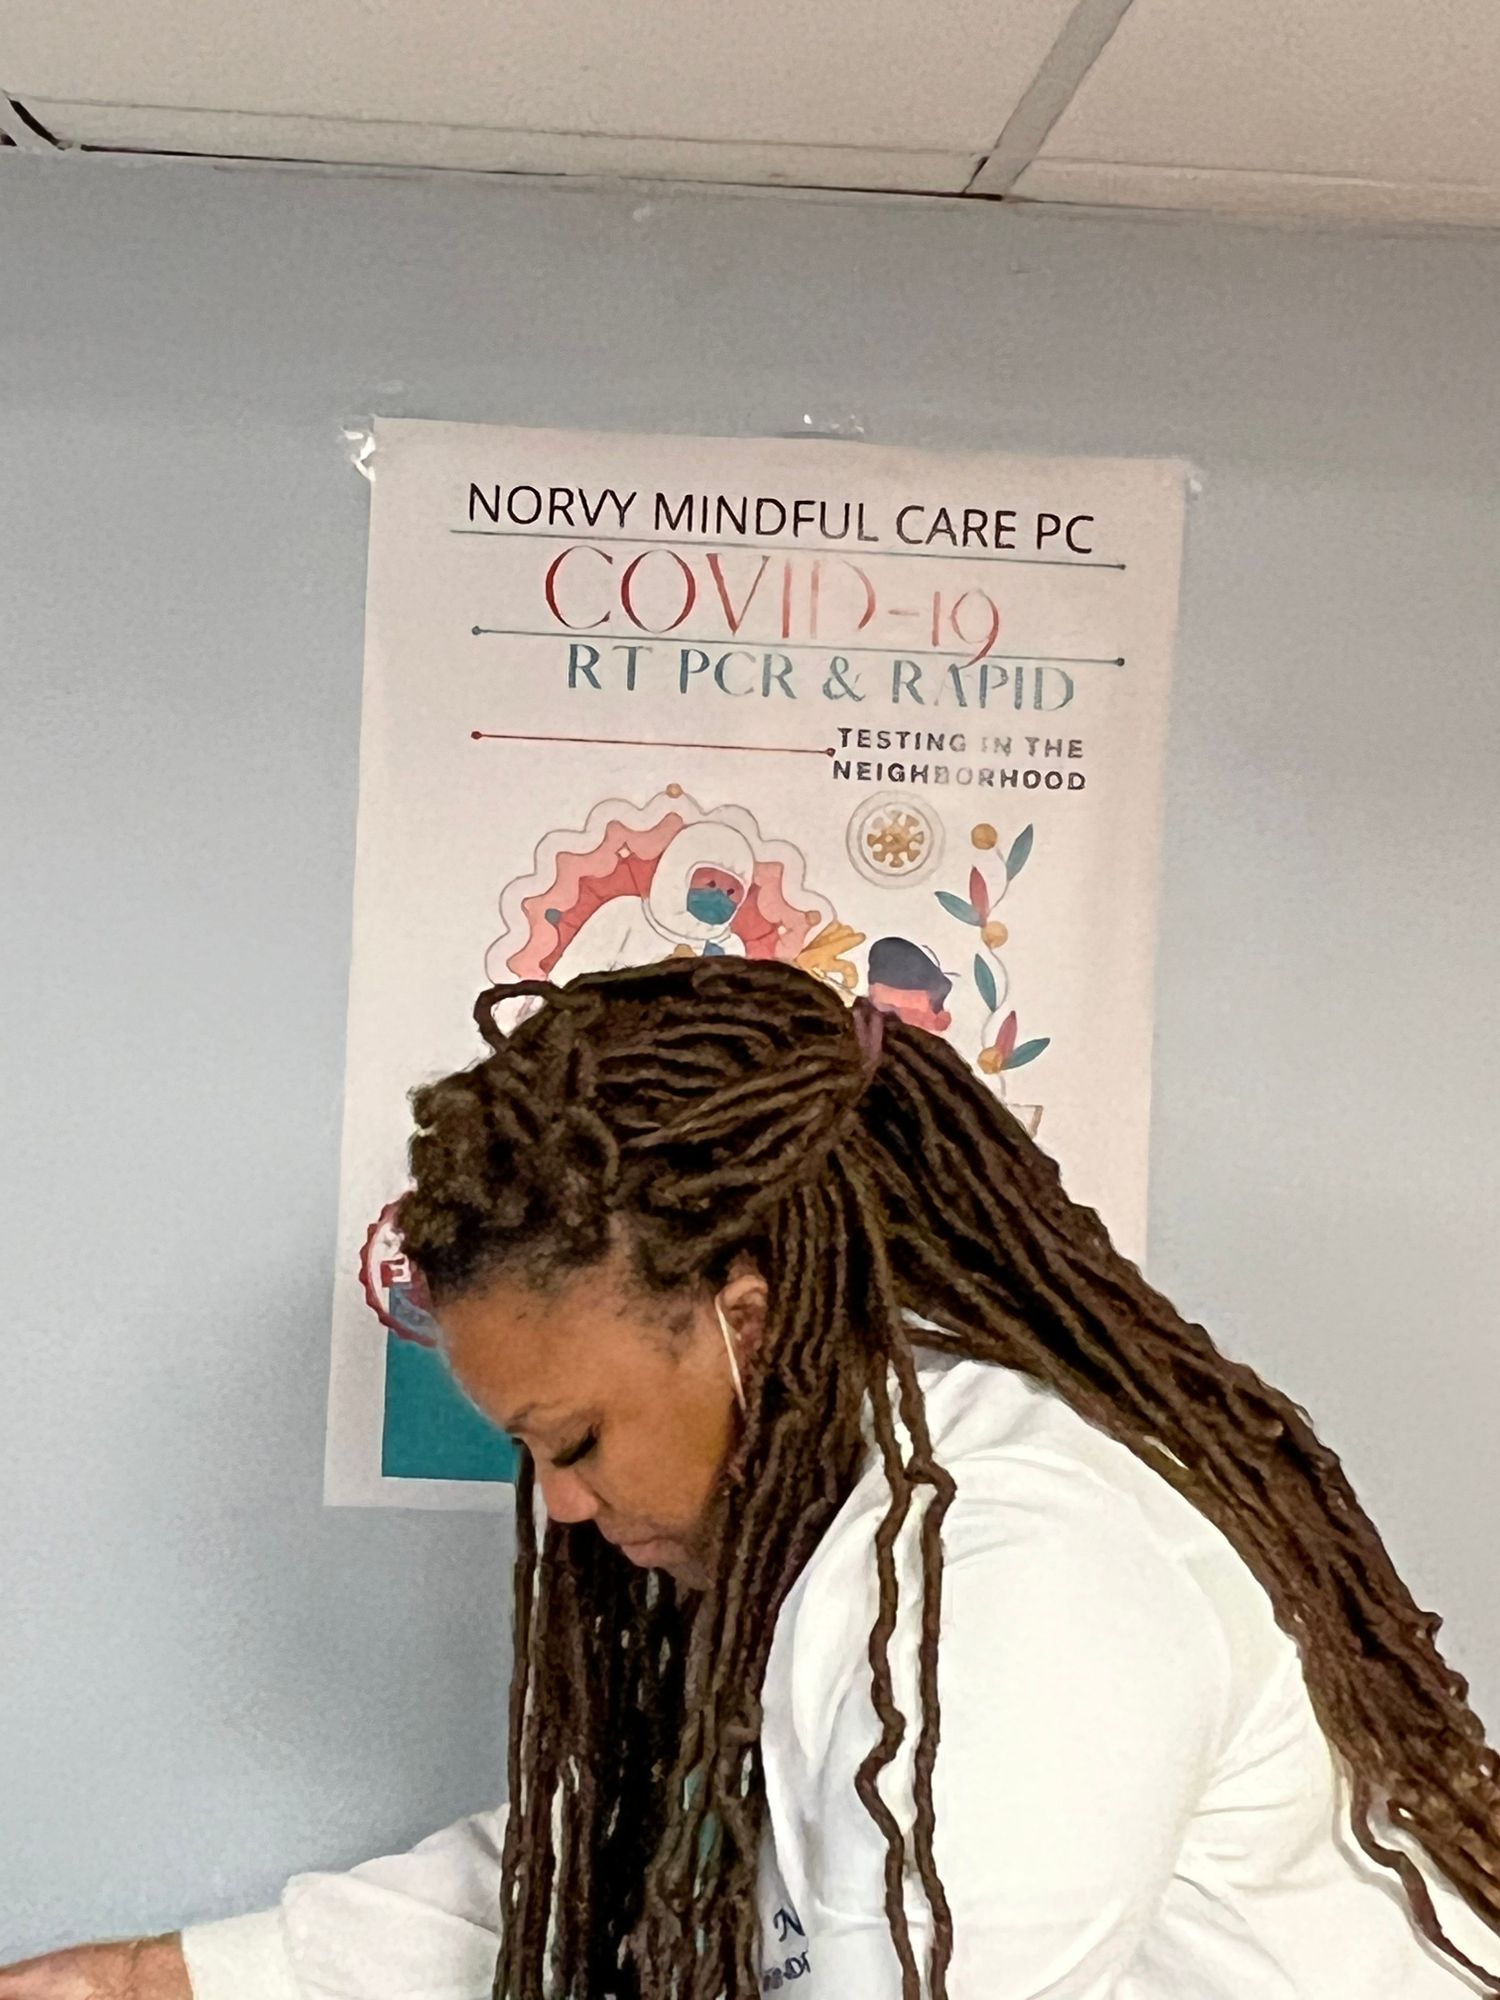 Gallery Photo of Norvy Mindful Care on the front lines providing COVID testing!